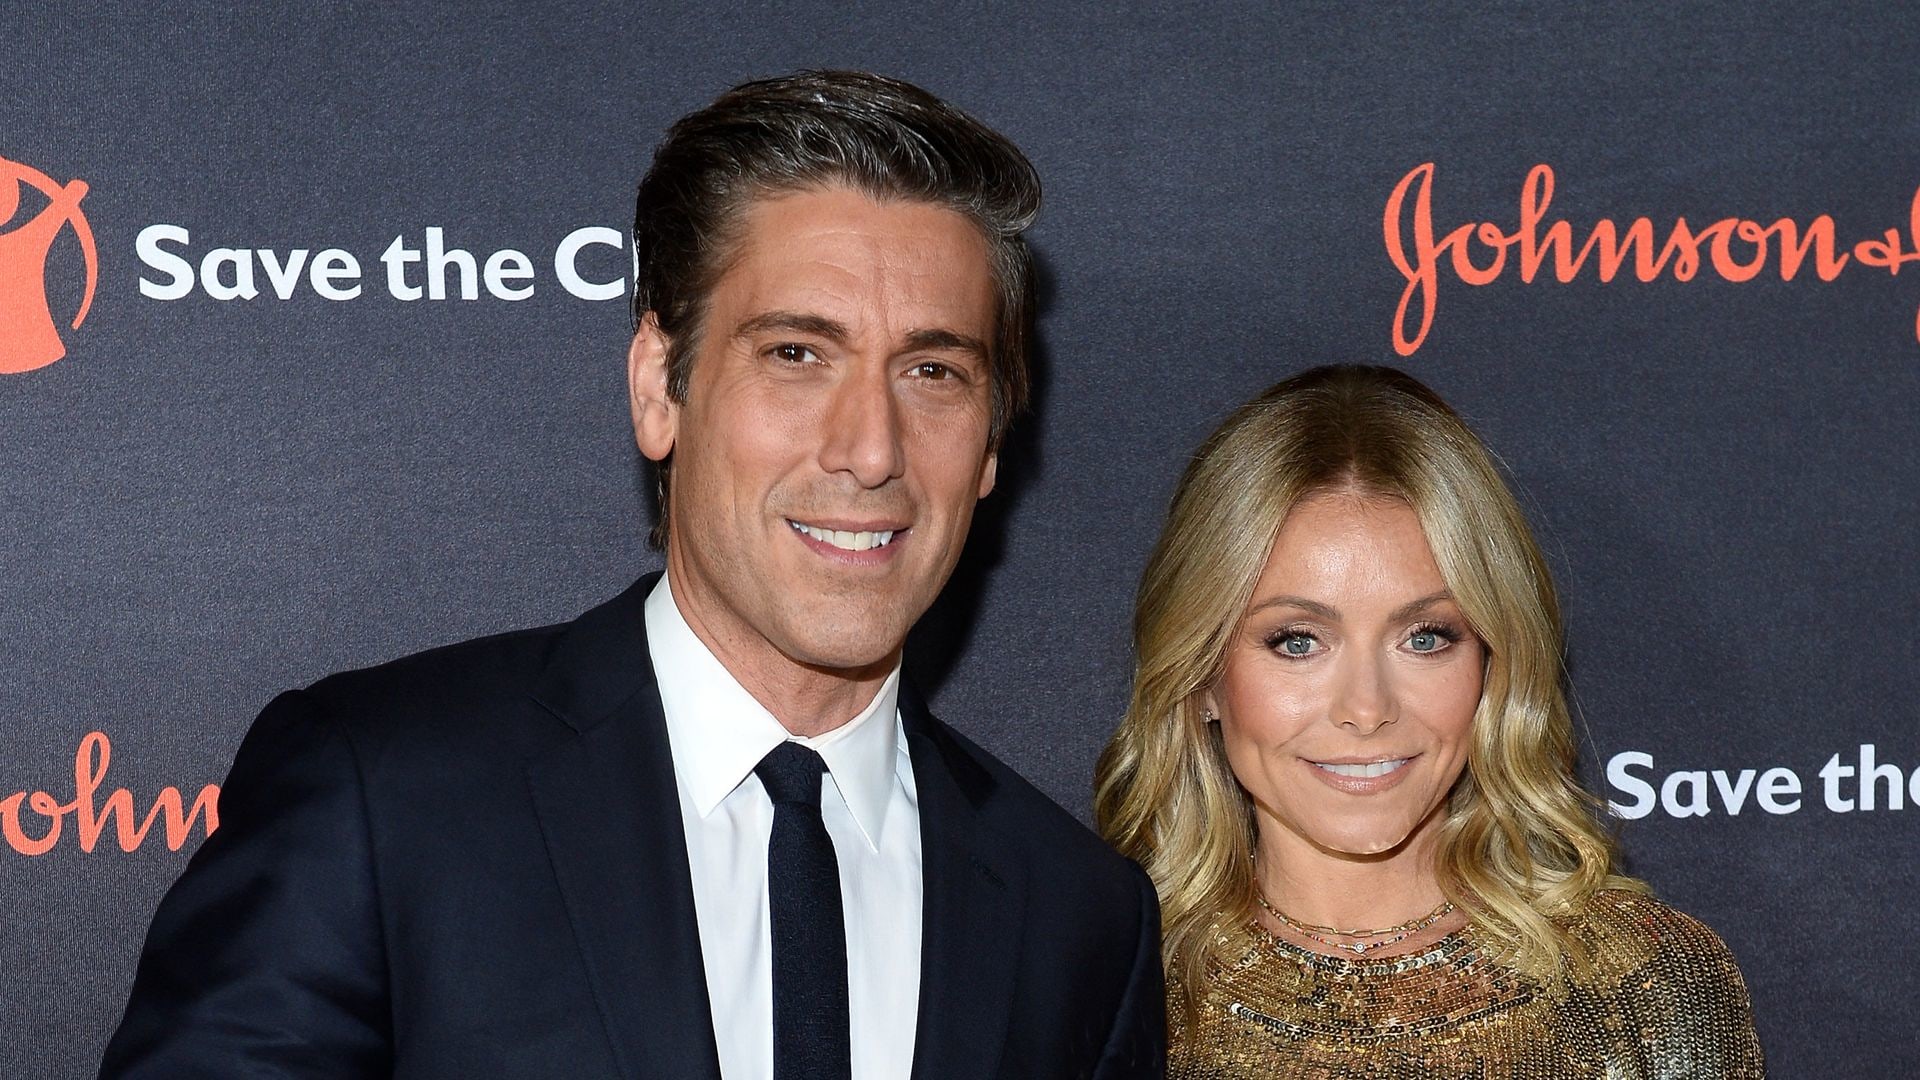 Kelly Ripa turns 53 with candid admission during on-air celebration, David Muir chimes in